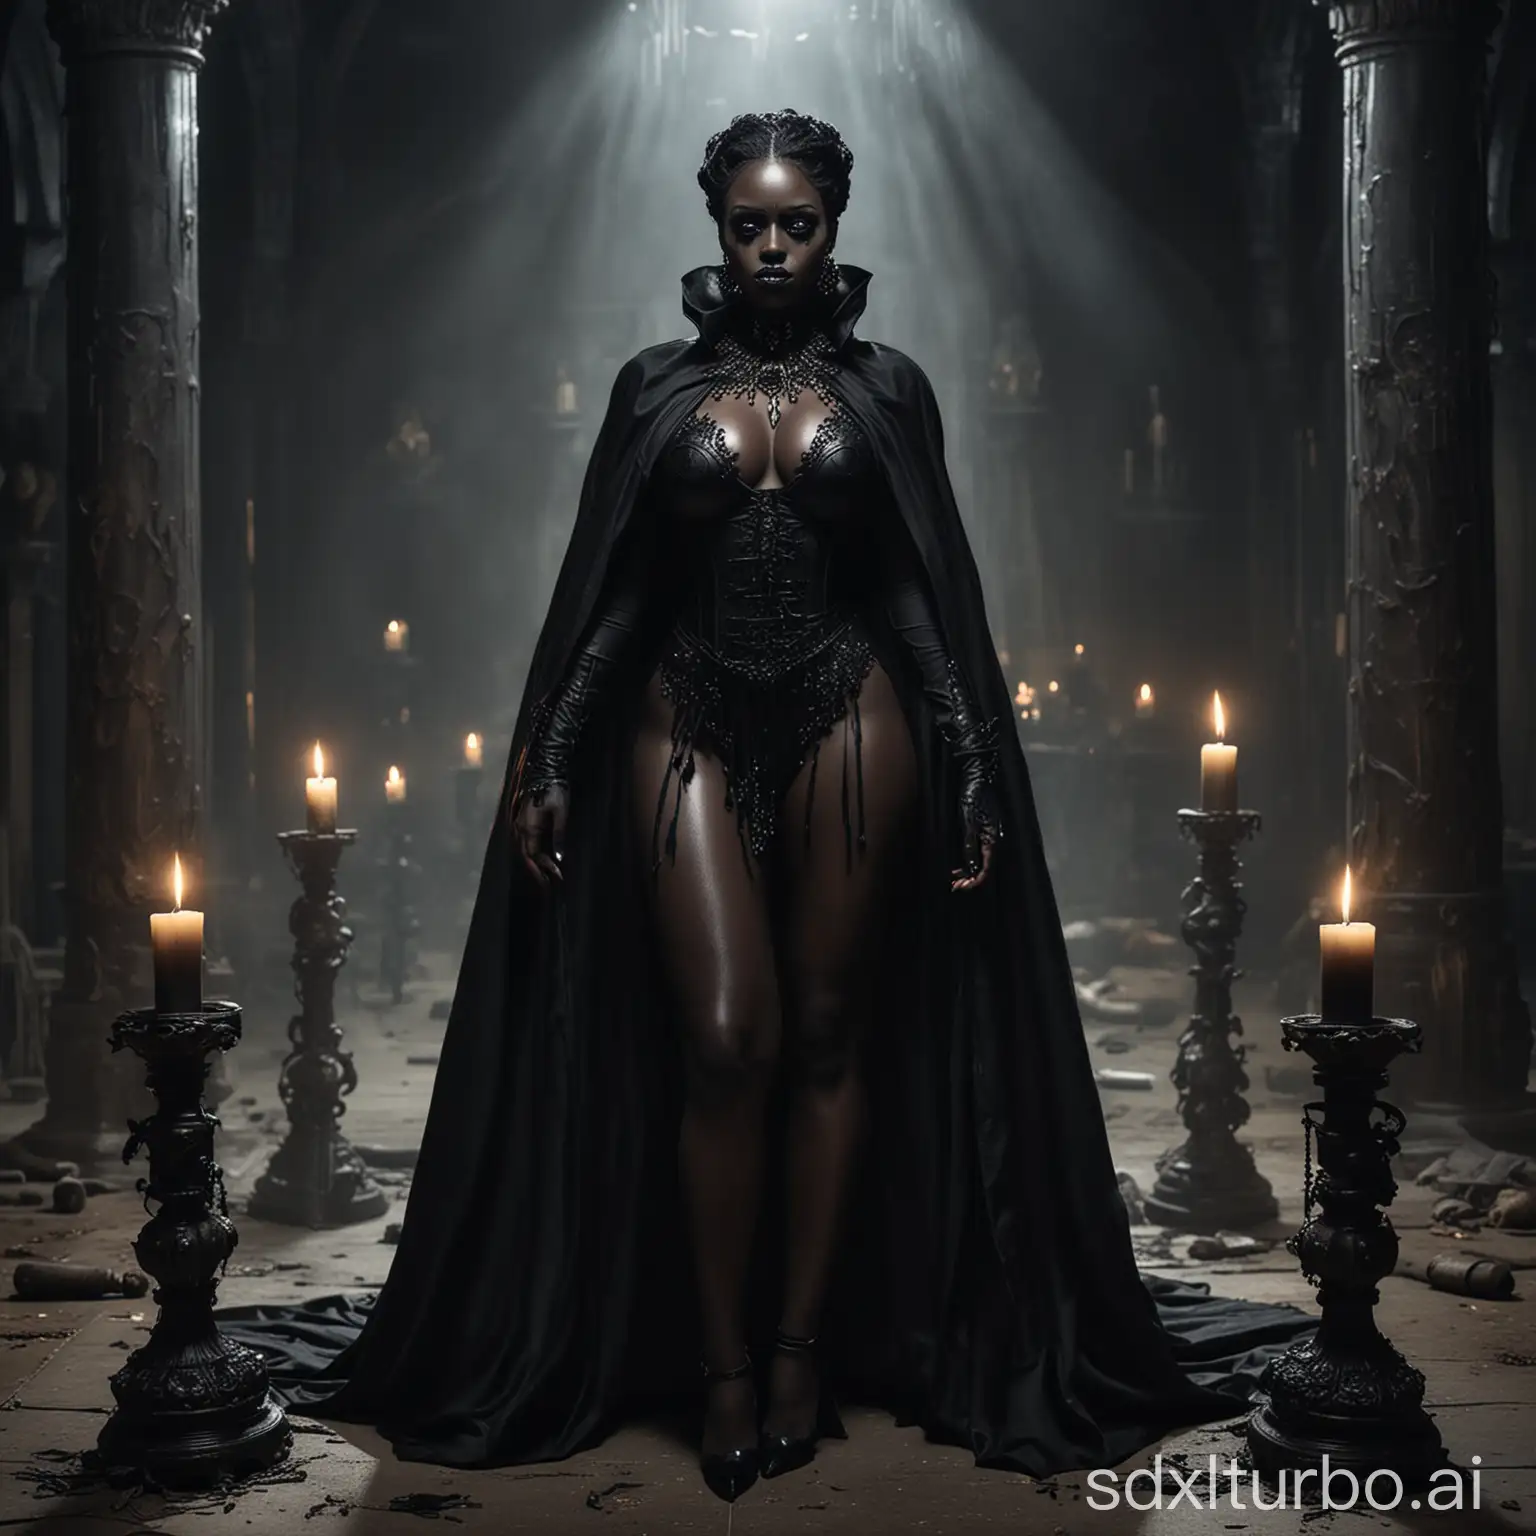 a majestic and powerful black woman, black makeup, large breasts exuding an aura of authority. Her imposing presence is accentuated by an air of mystique. Her dark costume and black cape with a high collar further accentuate her imposing presence, she is standing wearing high heels. The enchanting atmosphere is deepened by two skulls on either side, each with a lit black candle that casts mysterious shadows. This captivating scene masterfully combines mystery and power